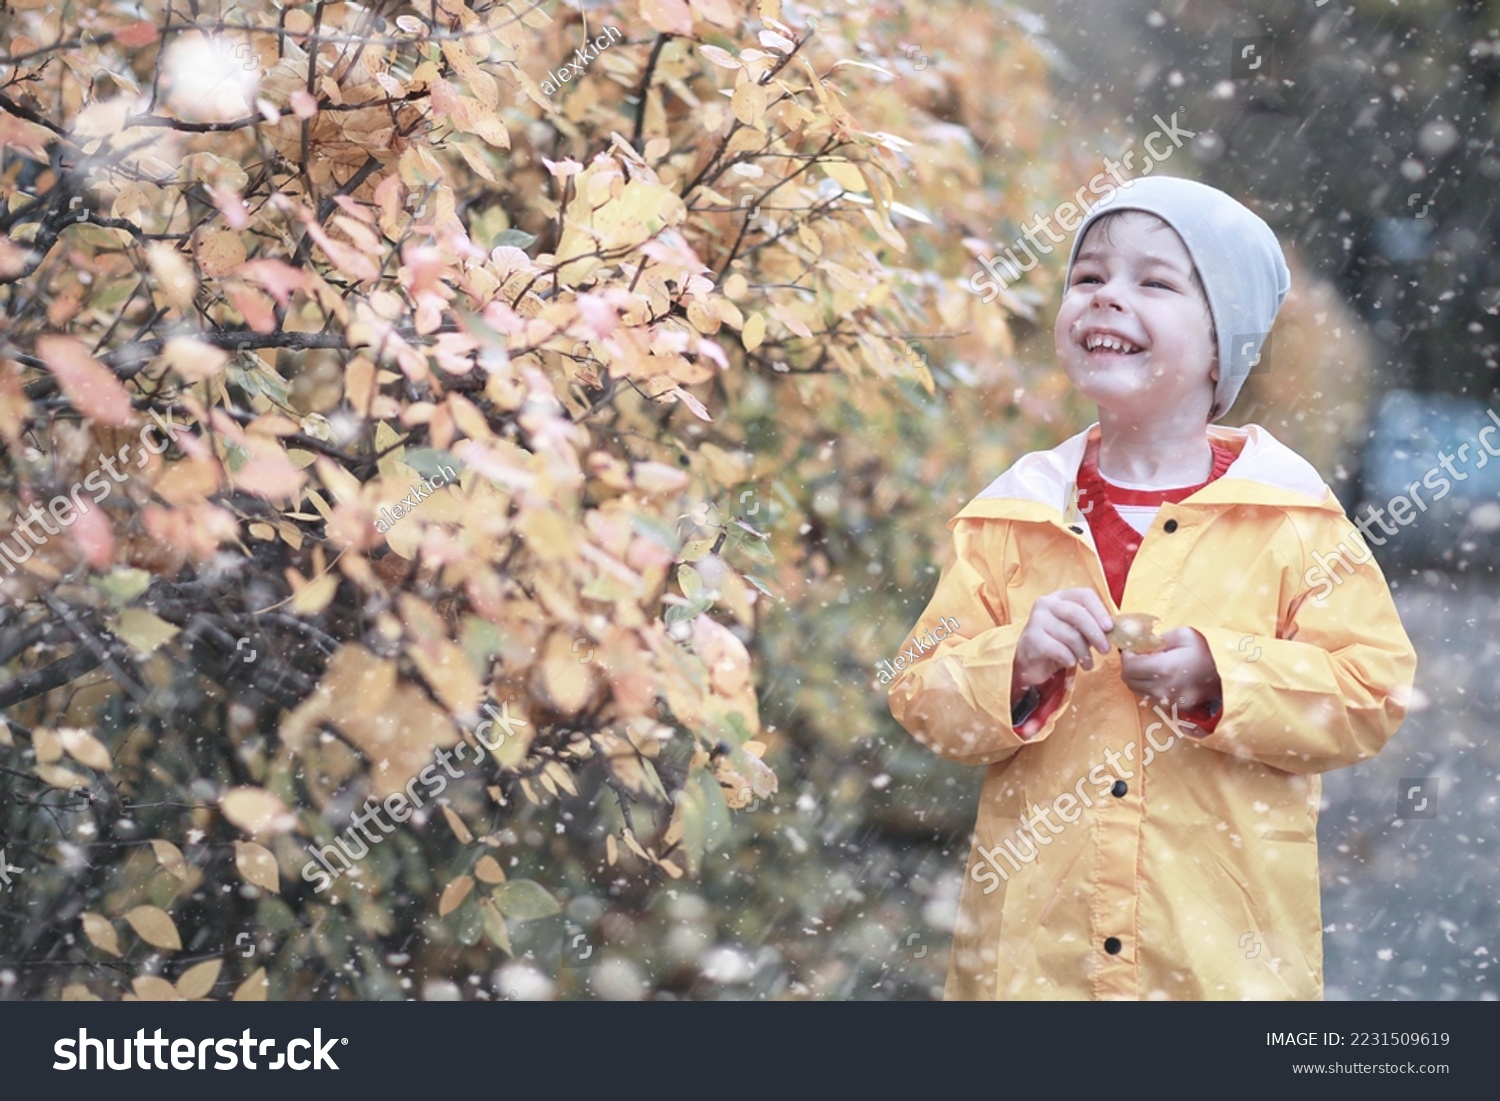 Kids walk in the park with first snow #2231509619